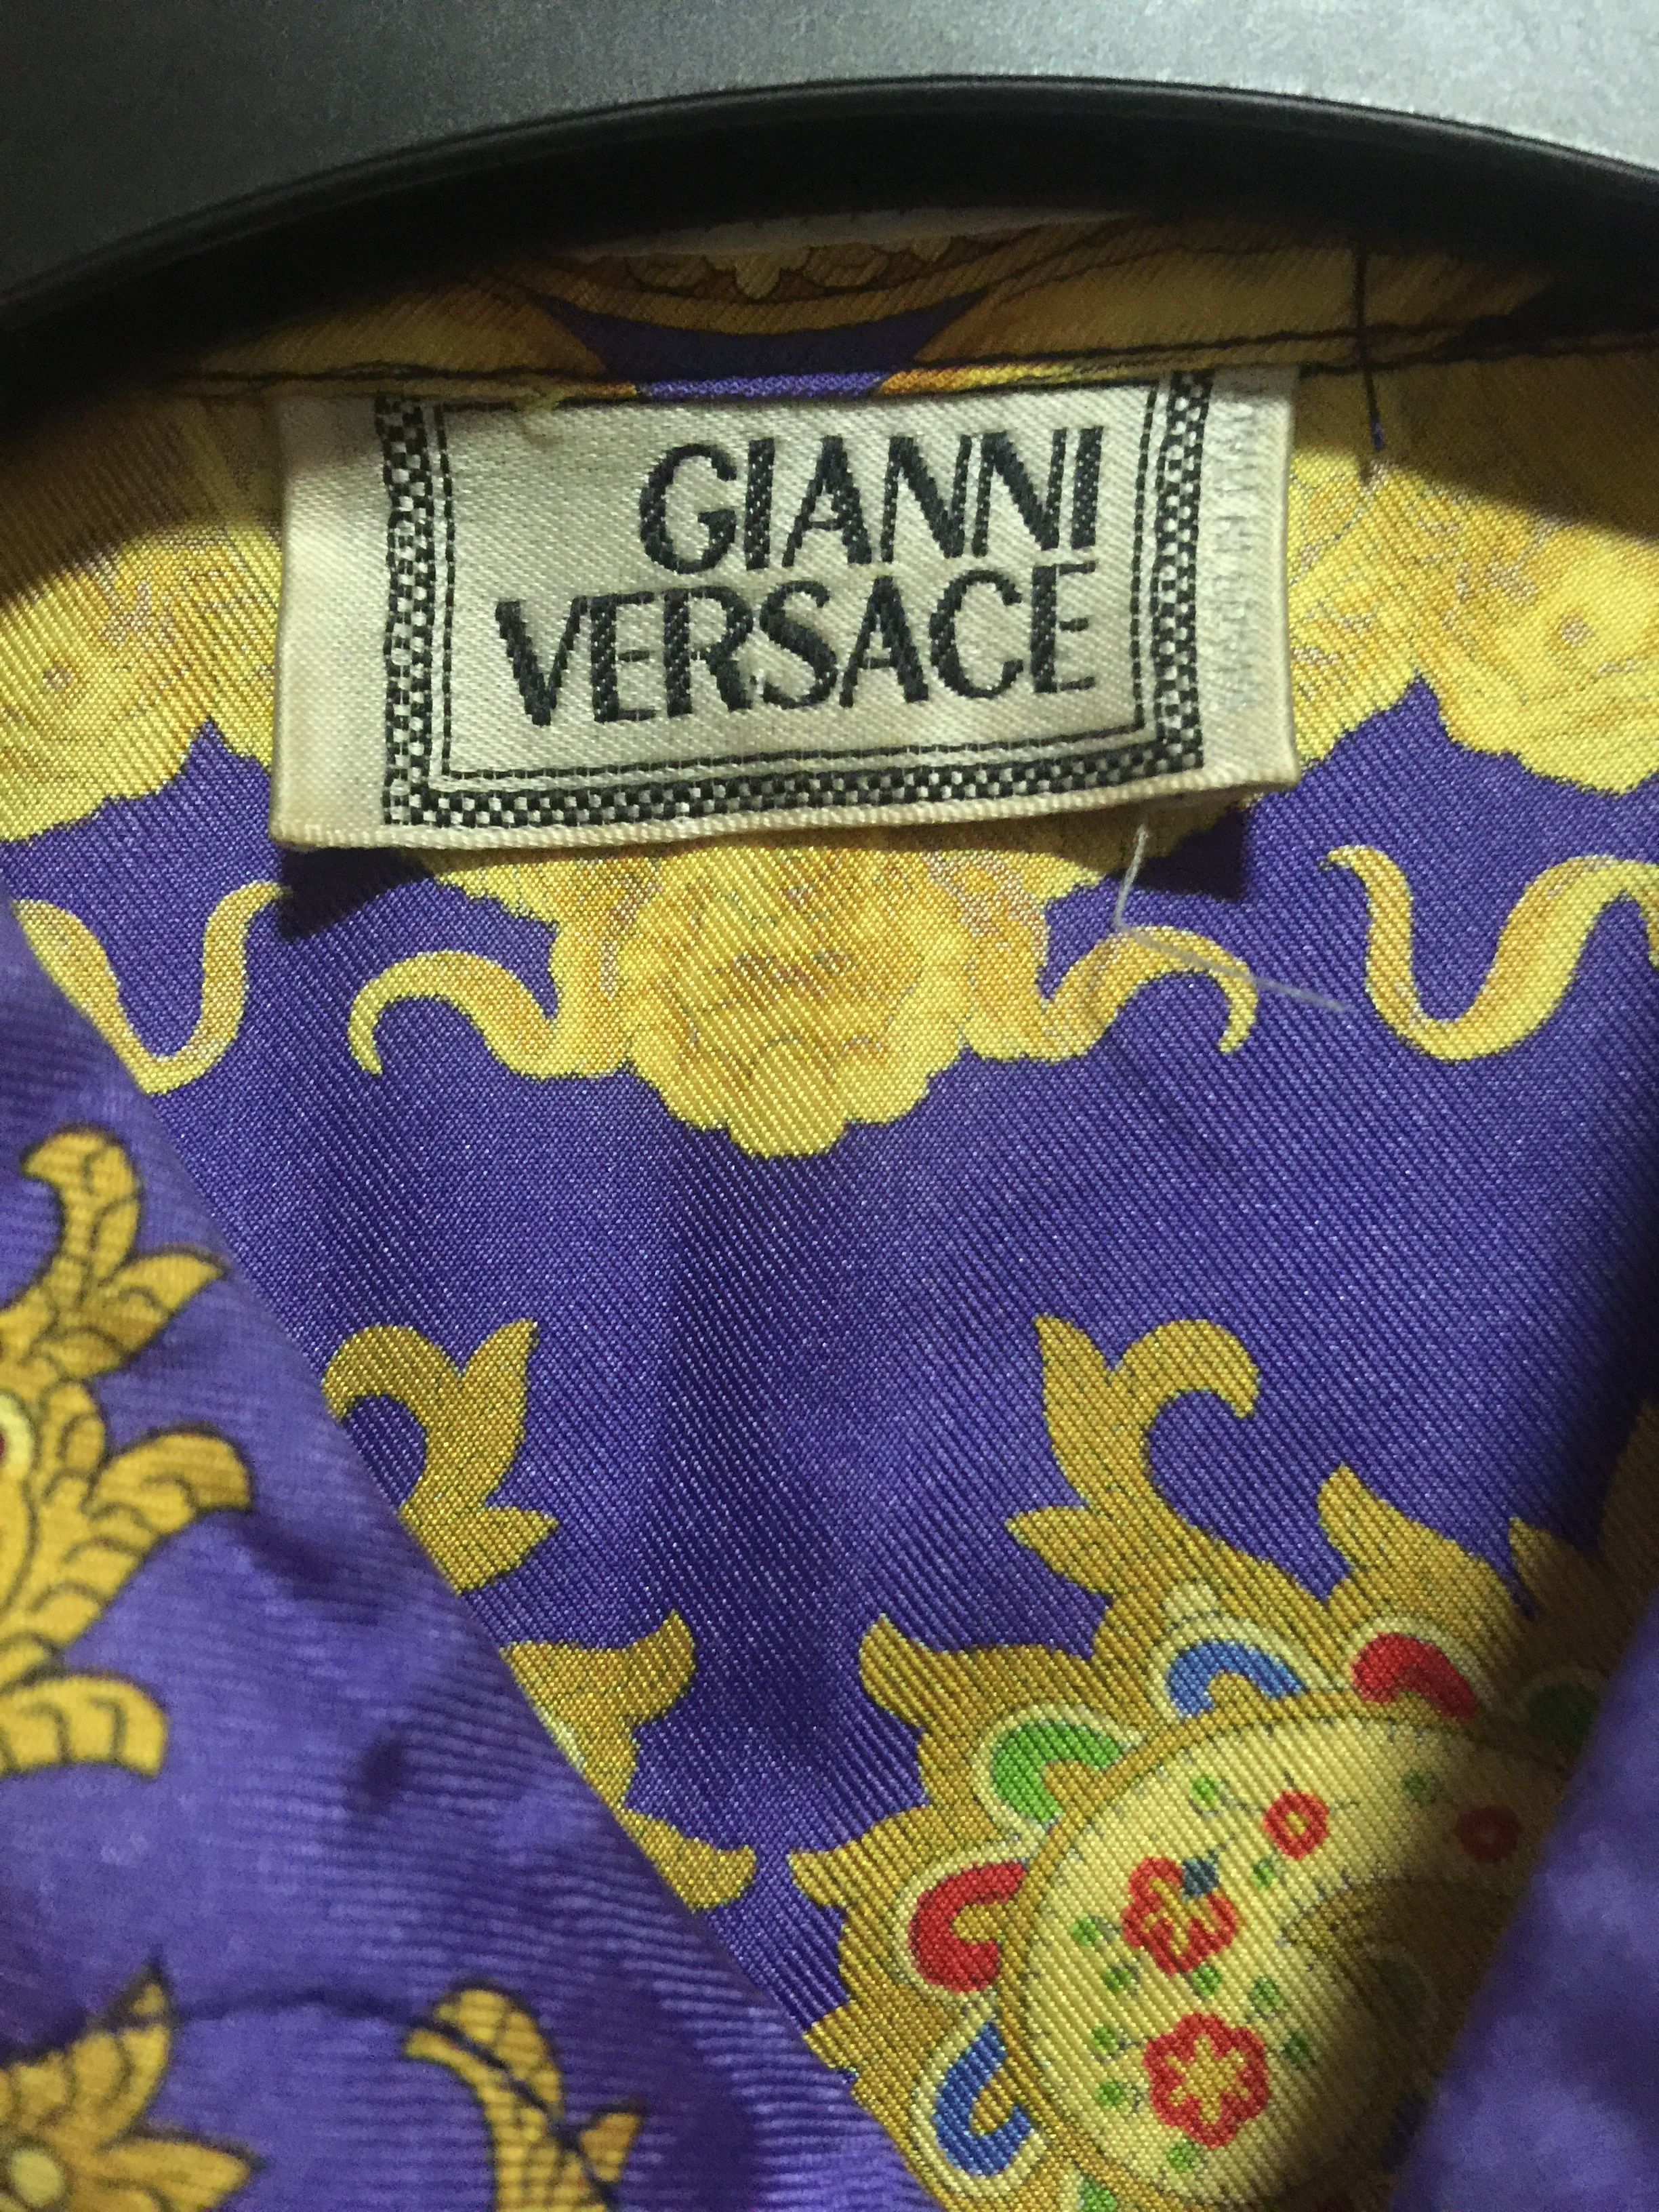 How much does this Gianni Versace Shirts worth? | Styleforum